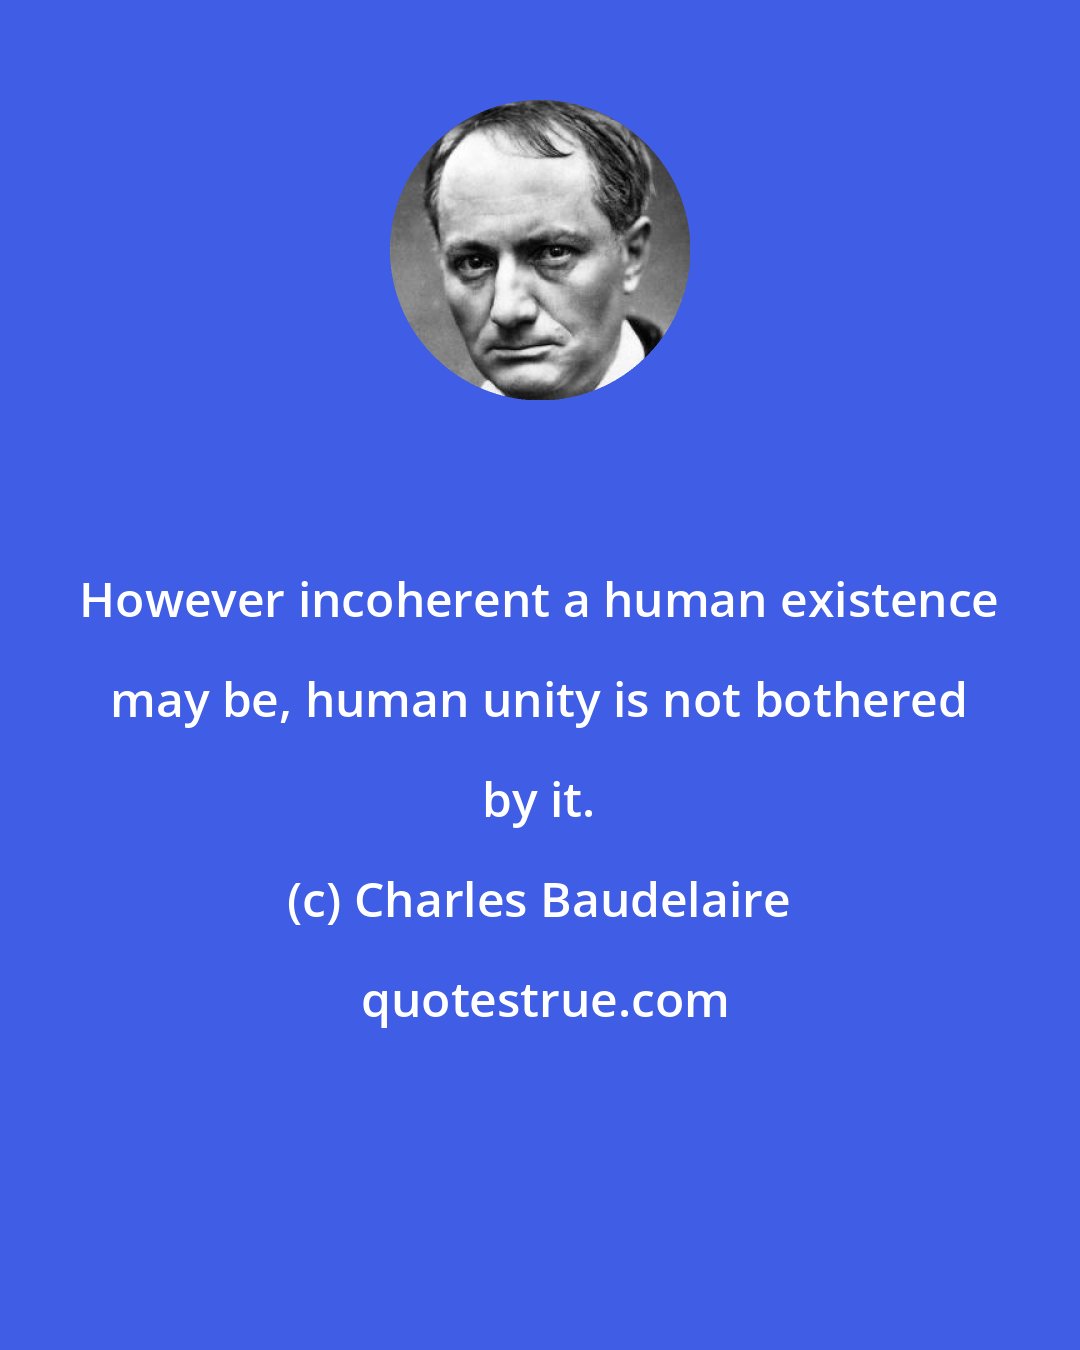 Charles Baudelaire: However incoherent a human existence may be, human unity is not bothered by it.